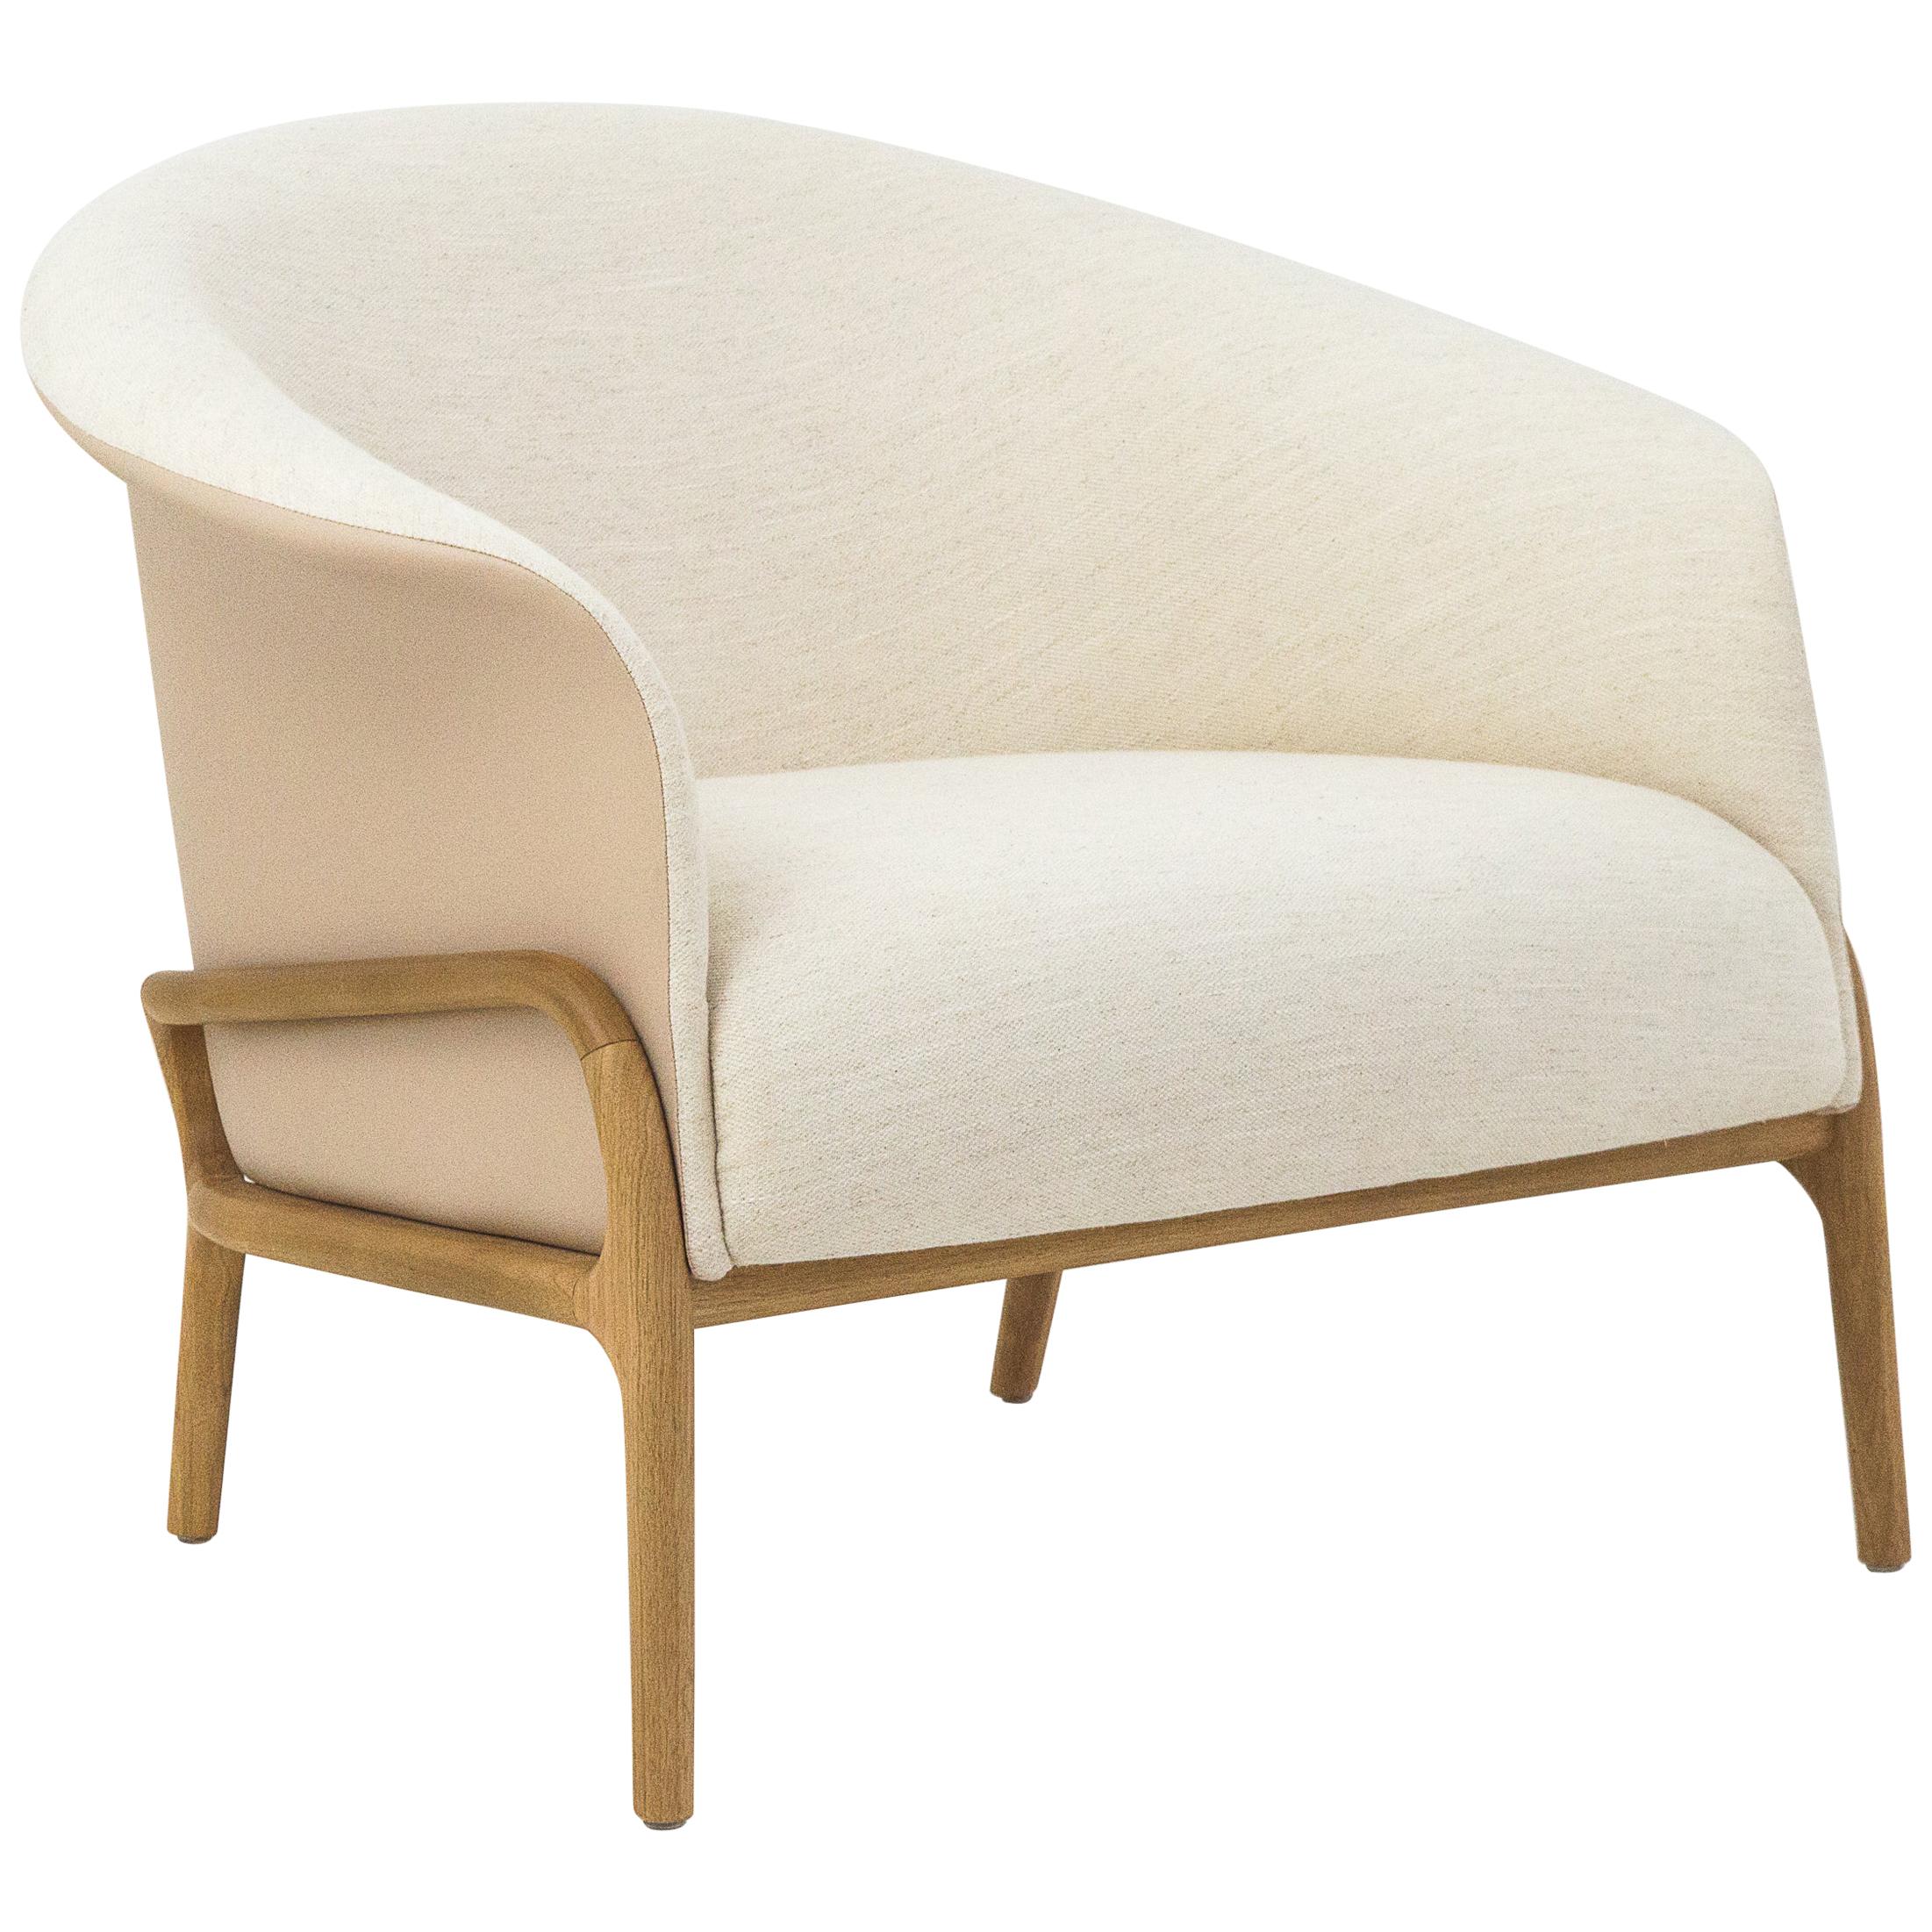 Modern Organic style armchair in Solid Wood, Upholstered Flexible Seating